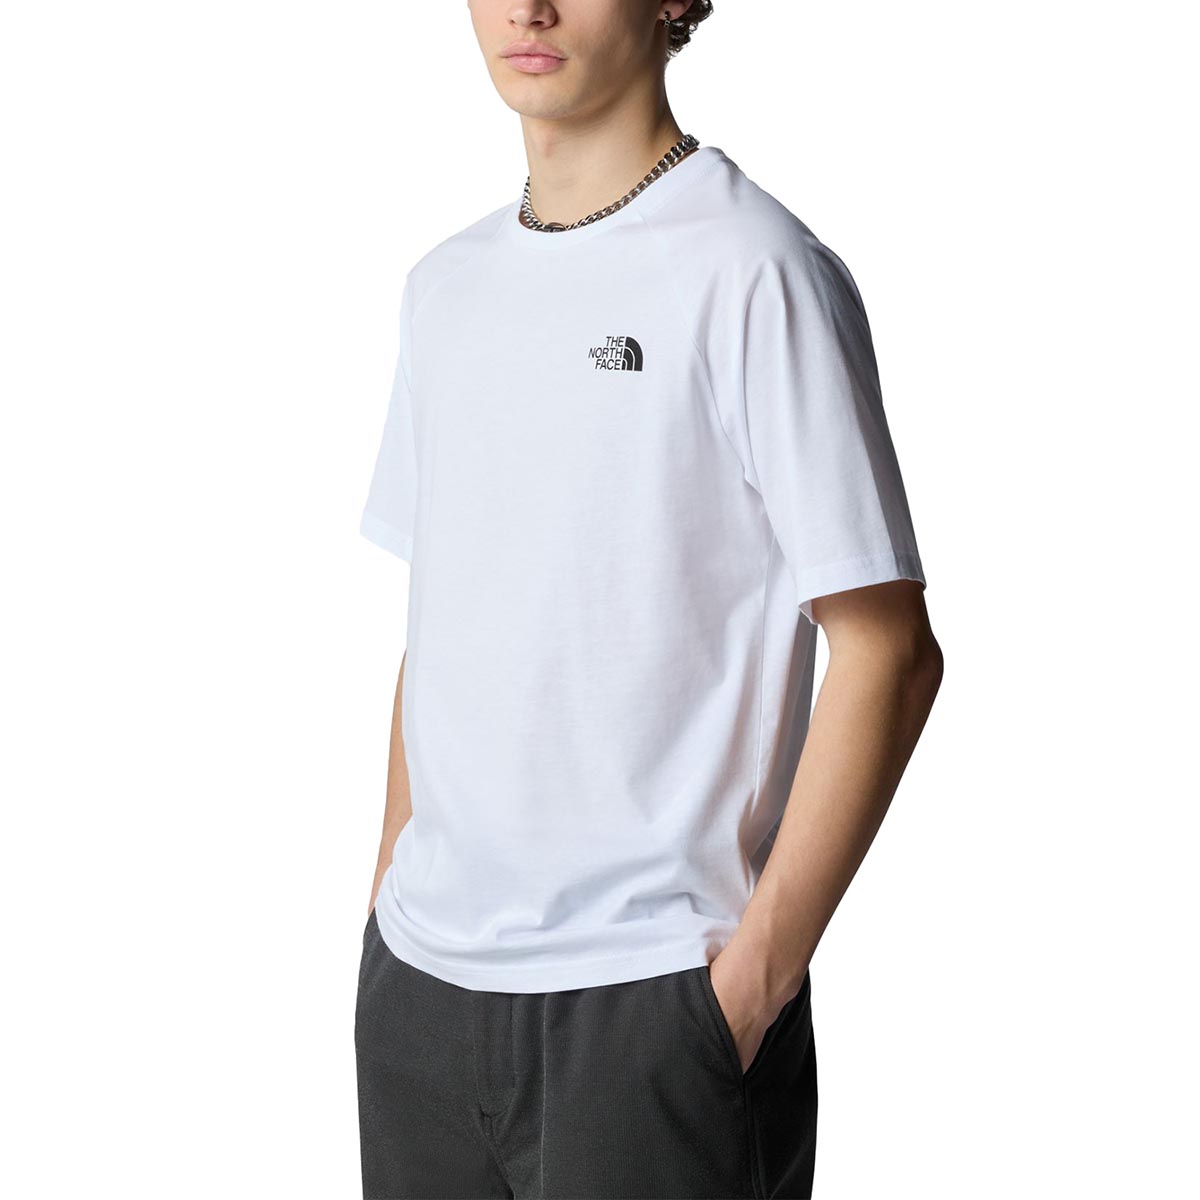 THE NORTH FACE - NORTH FACES TEE